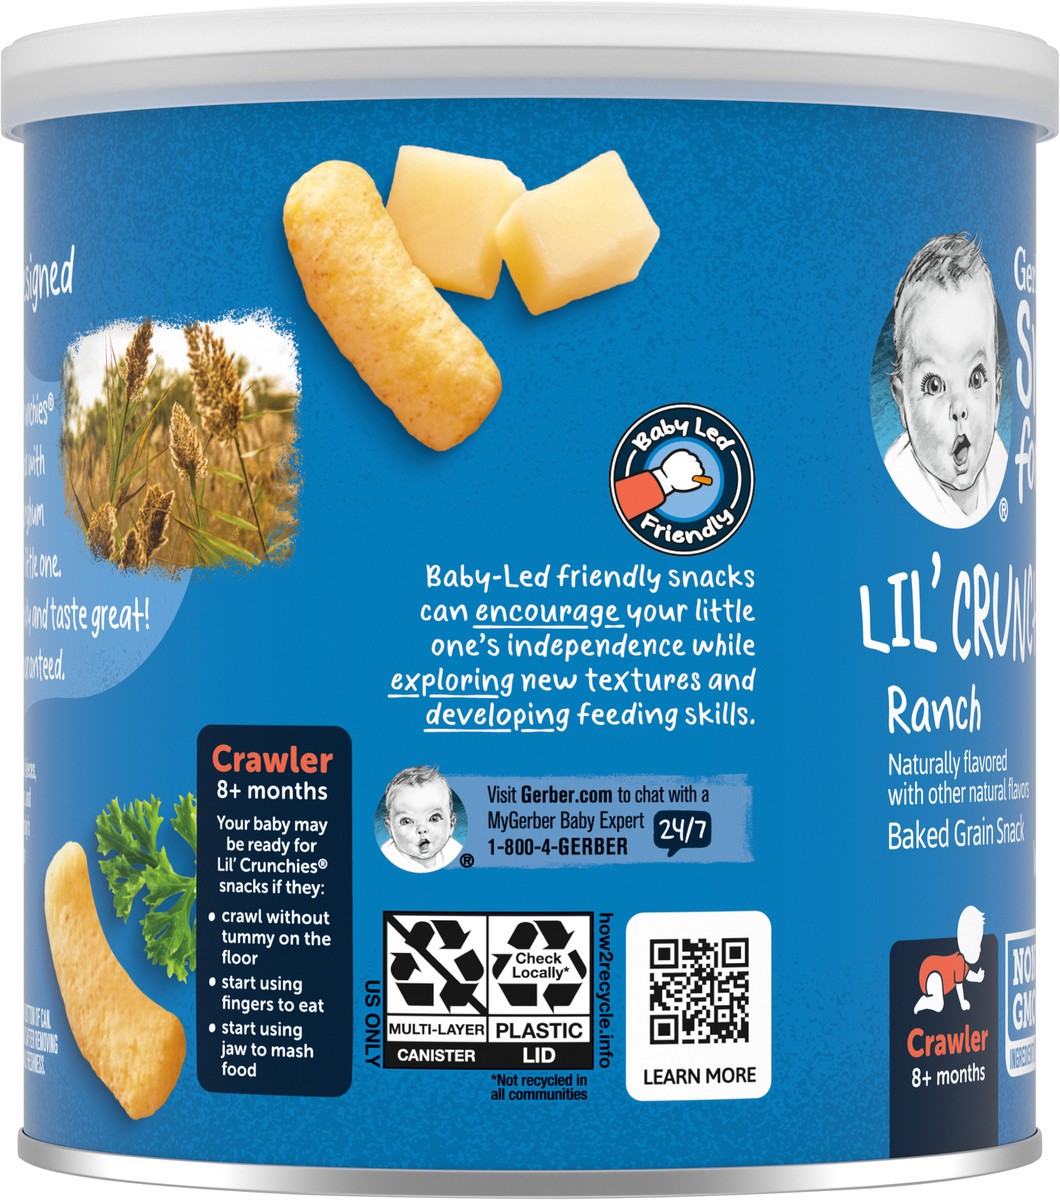 slide 5 of 9, Gerber Snacks for Baby Lil Crunchies Ranch Puffs, 1.48 oz Canister, 1.48 oz